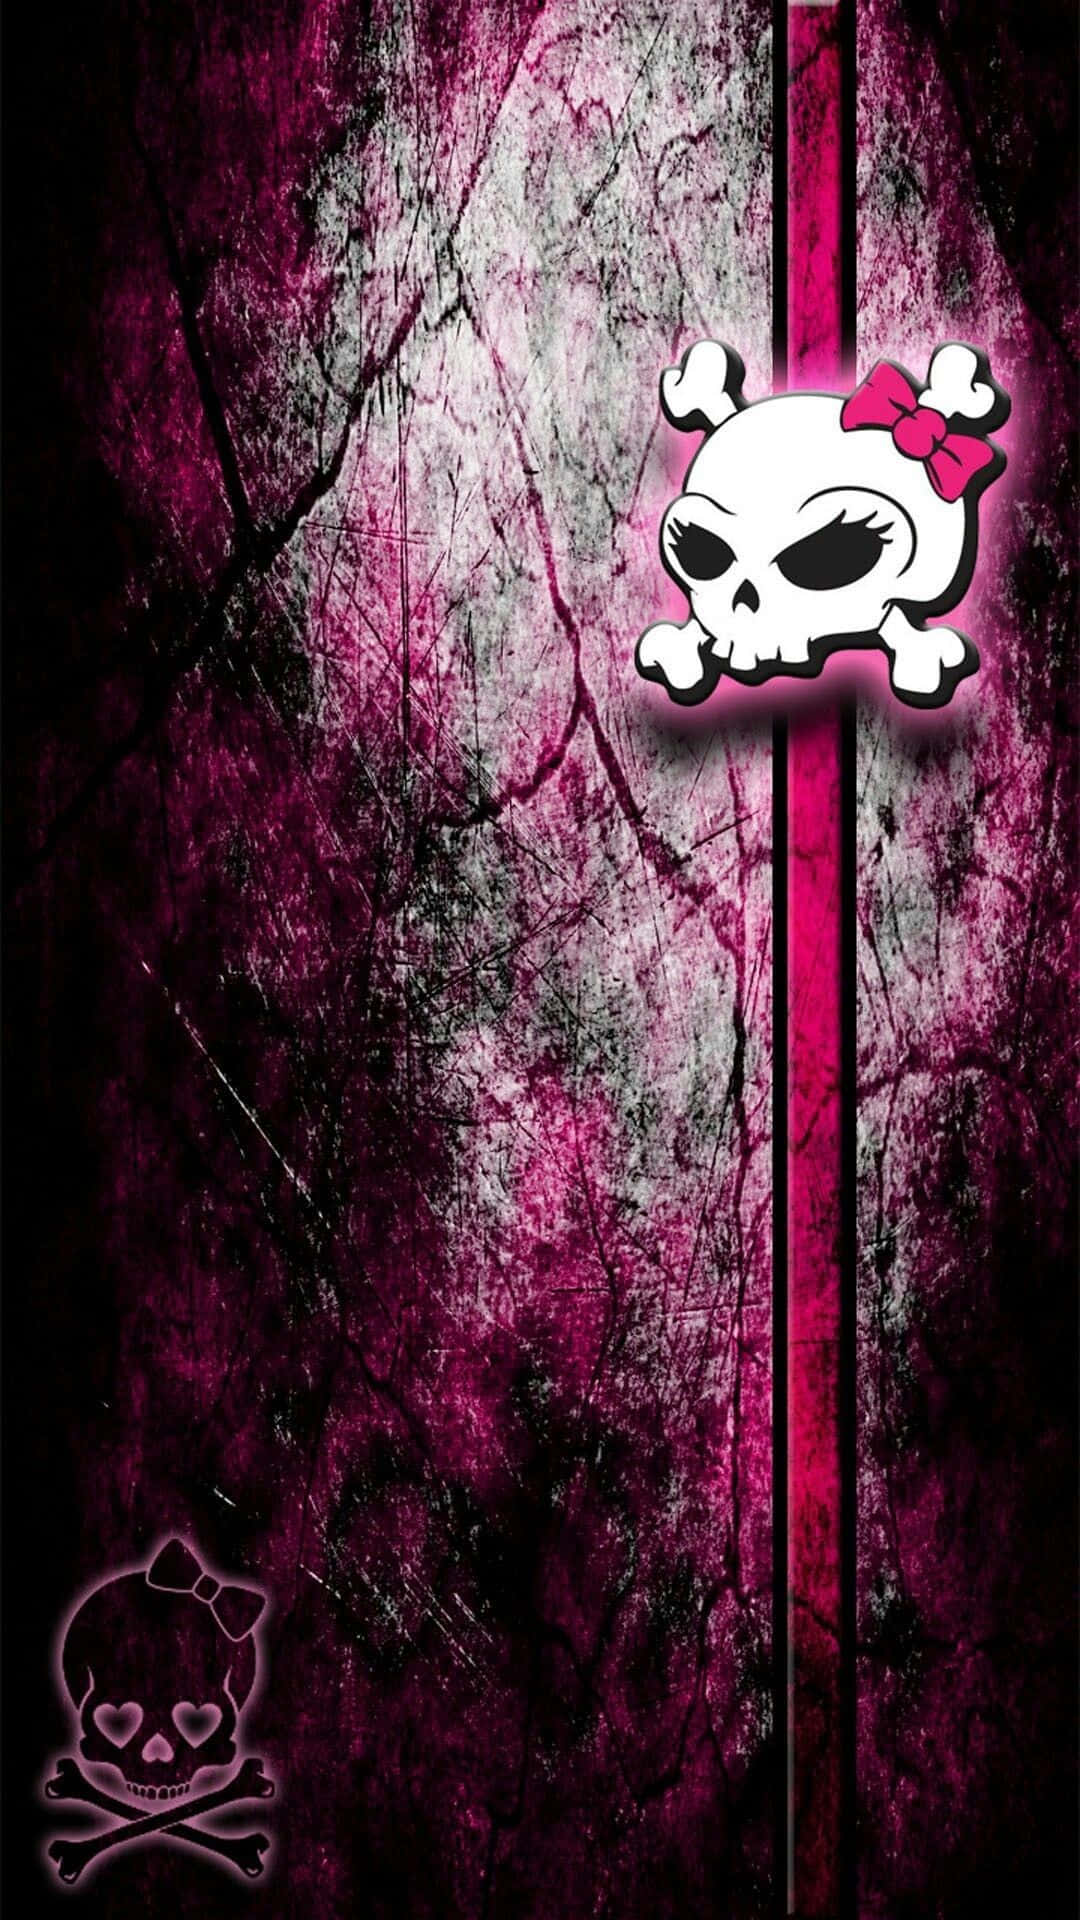 Need a spooky-yet-playful look this Halloween? Go pink! Wallpaper